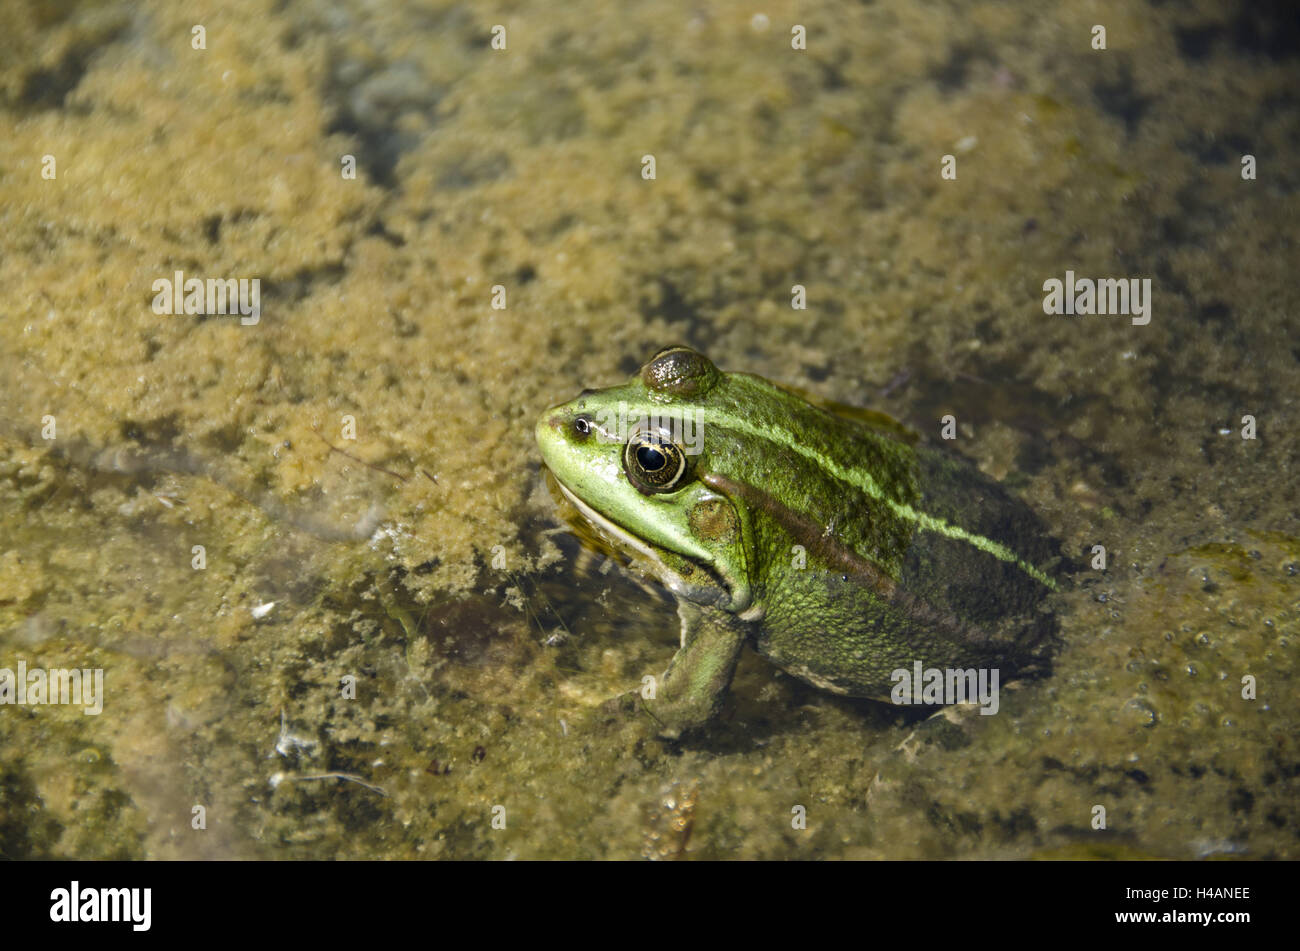 Pool frog in the pond, Stock Photo